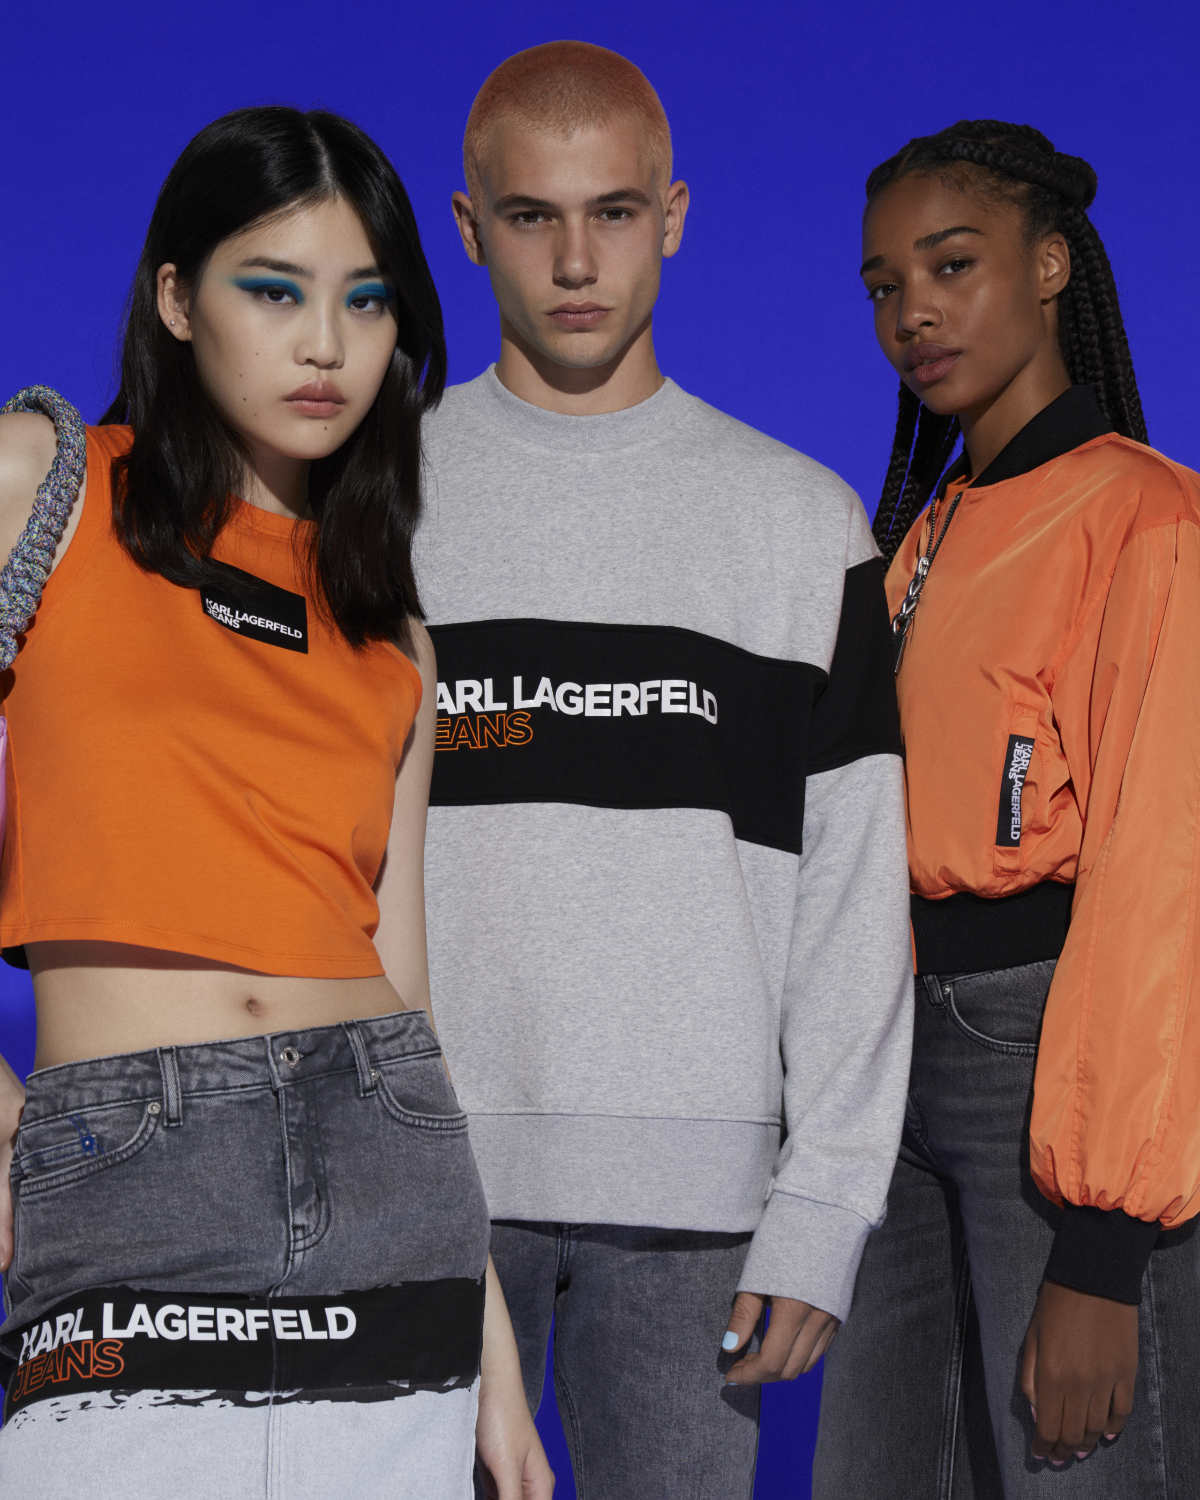 Karl Lagerfeld launches new jeans brand for Gen Z shoppers